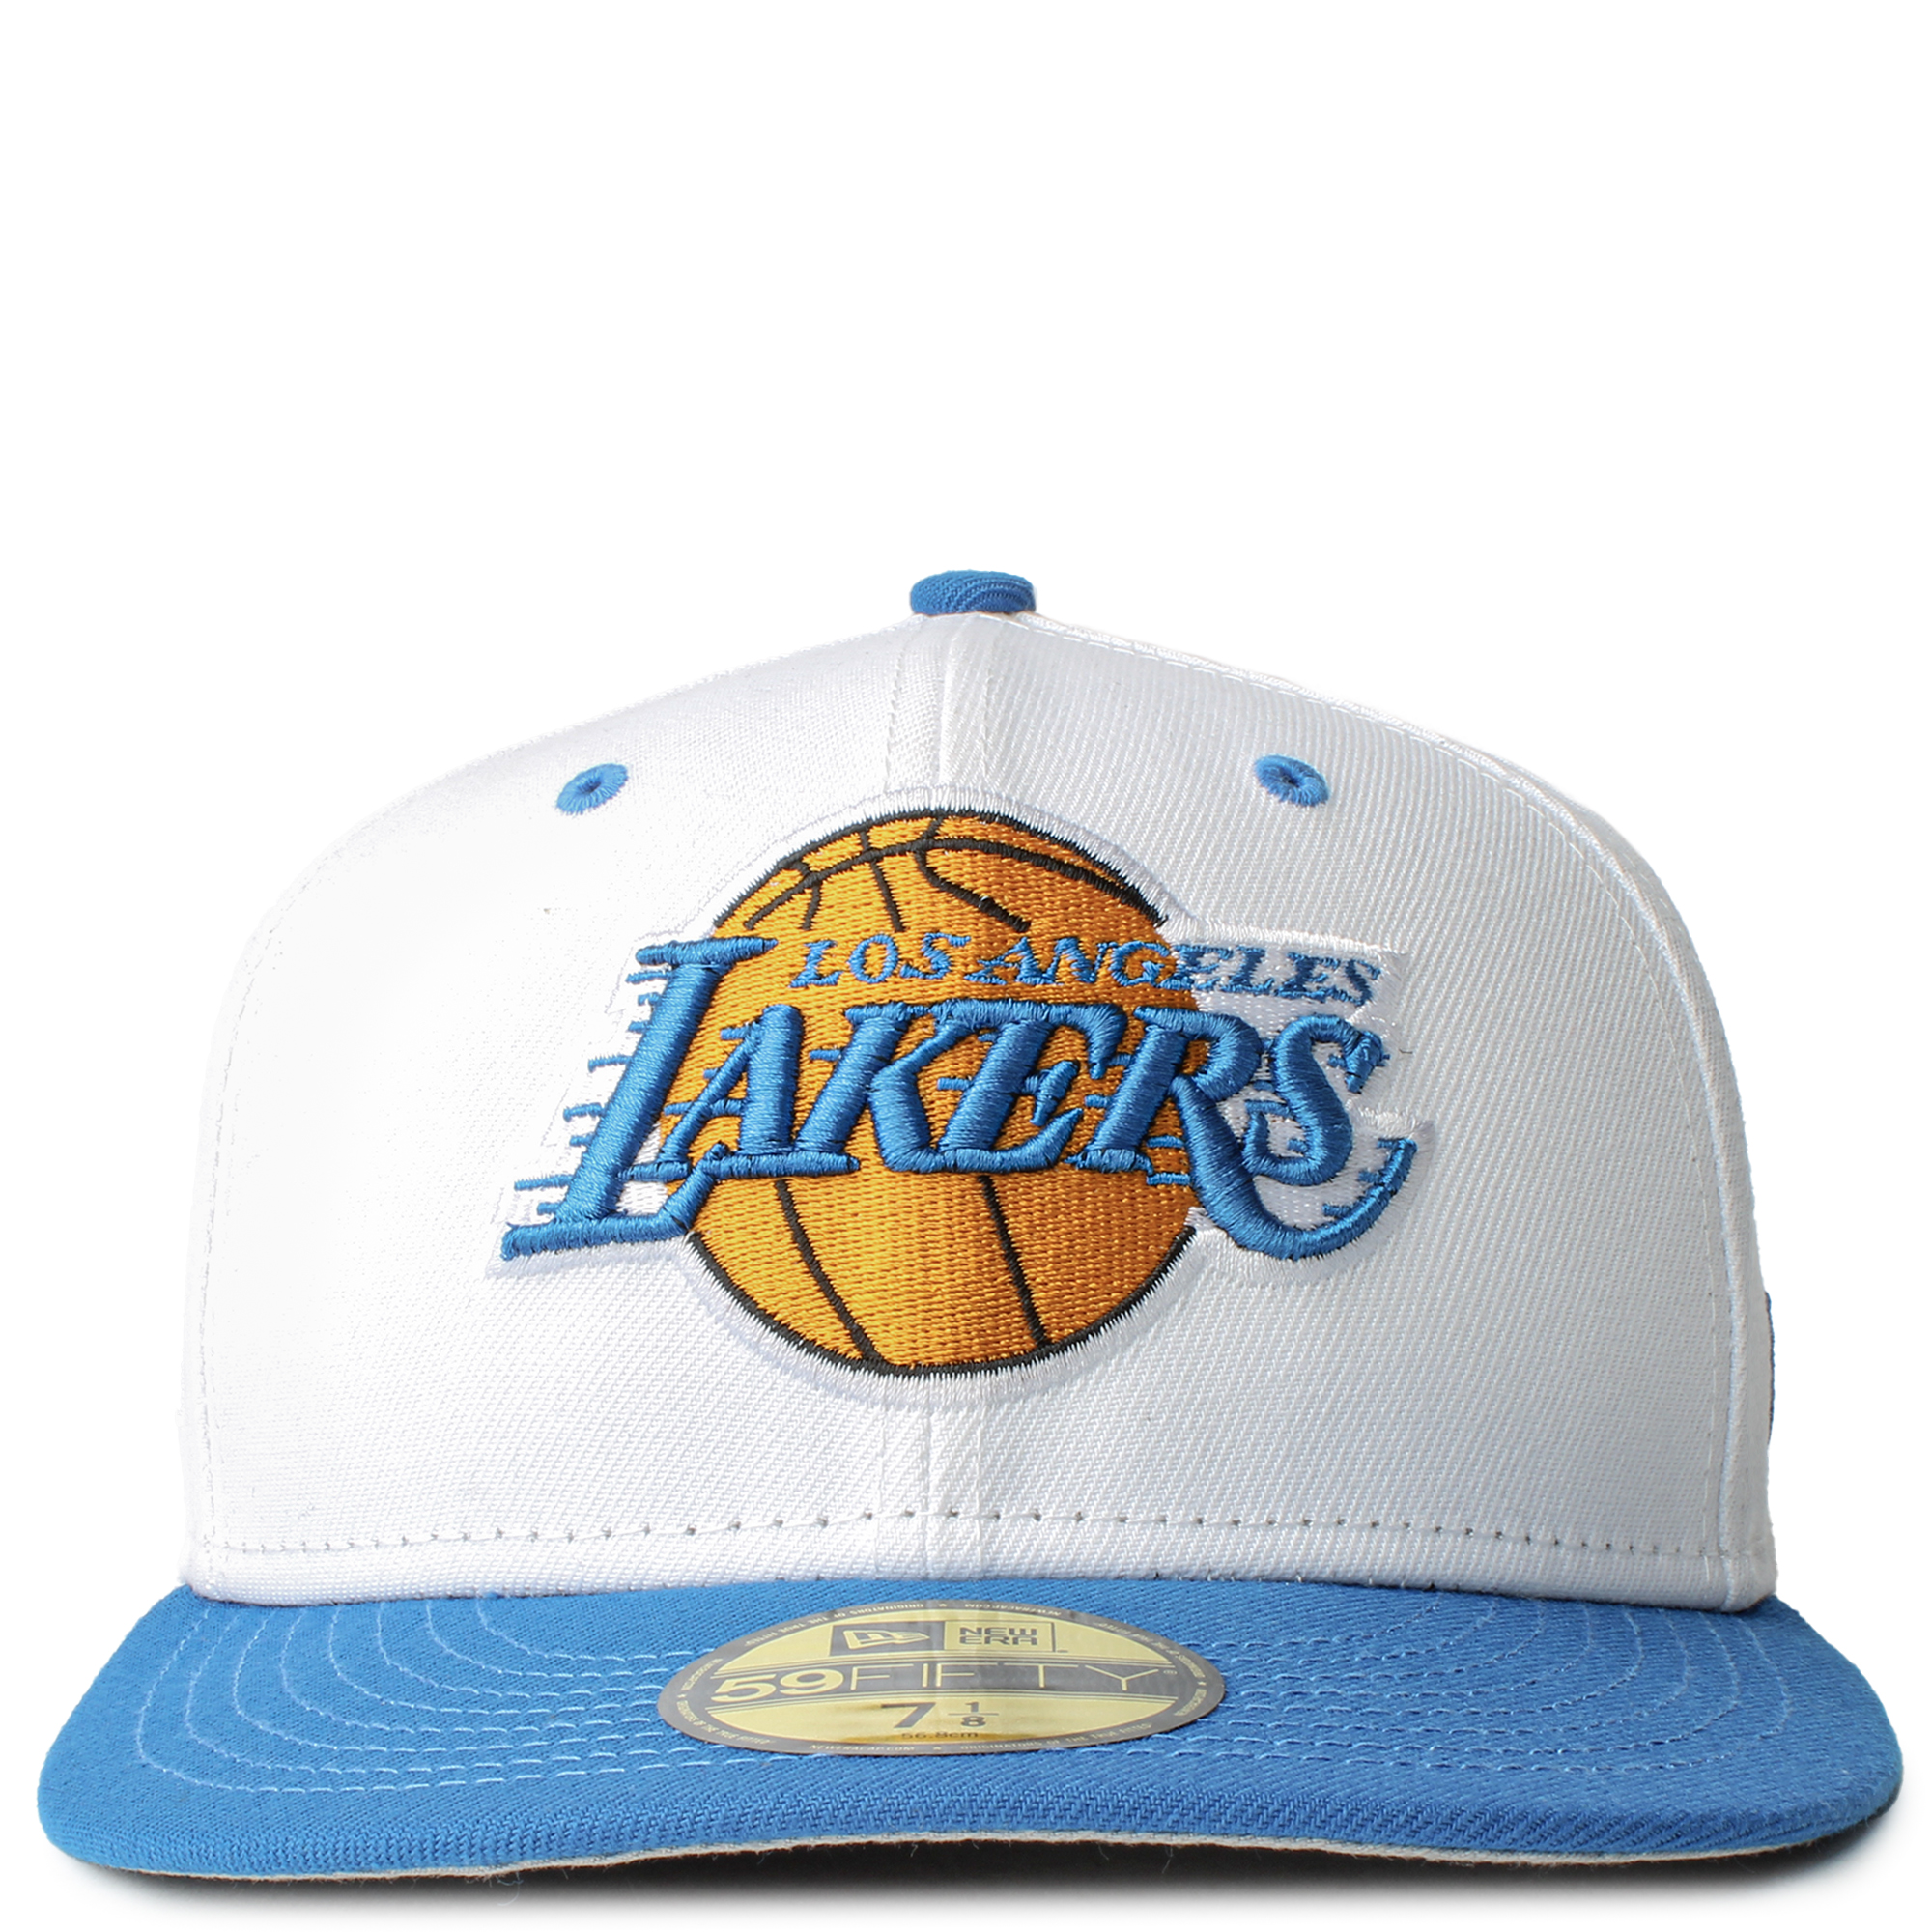 lakers blue fitted hat